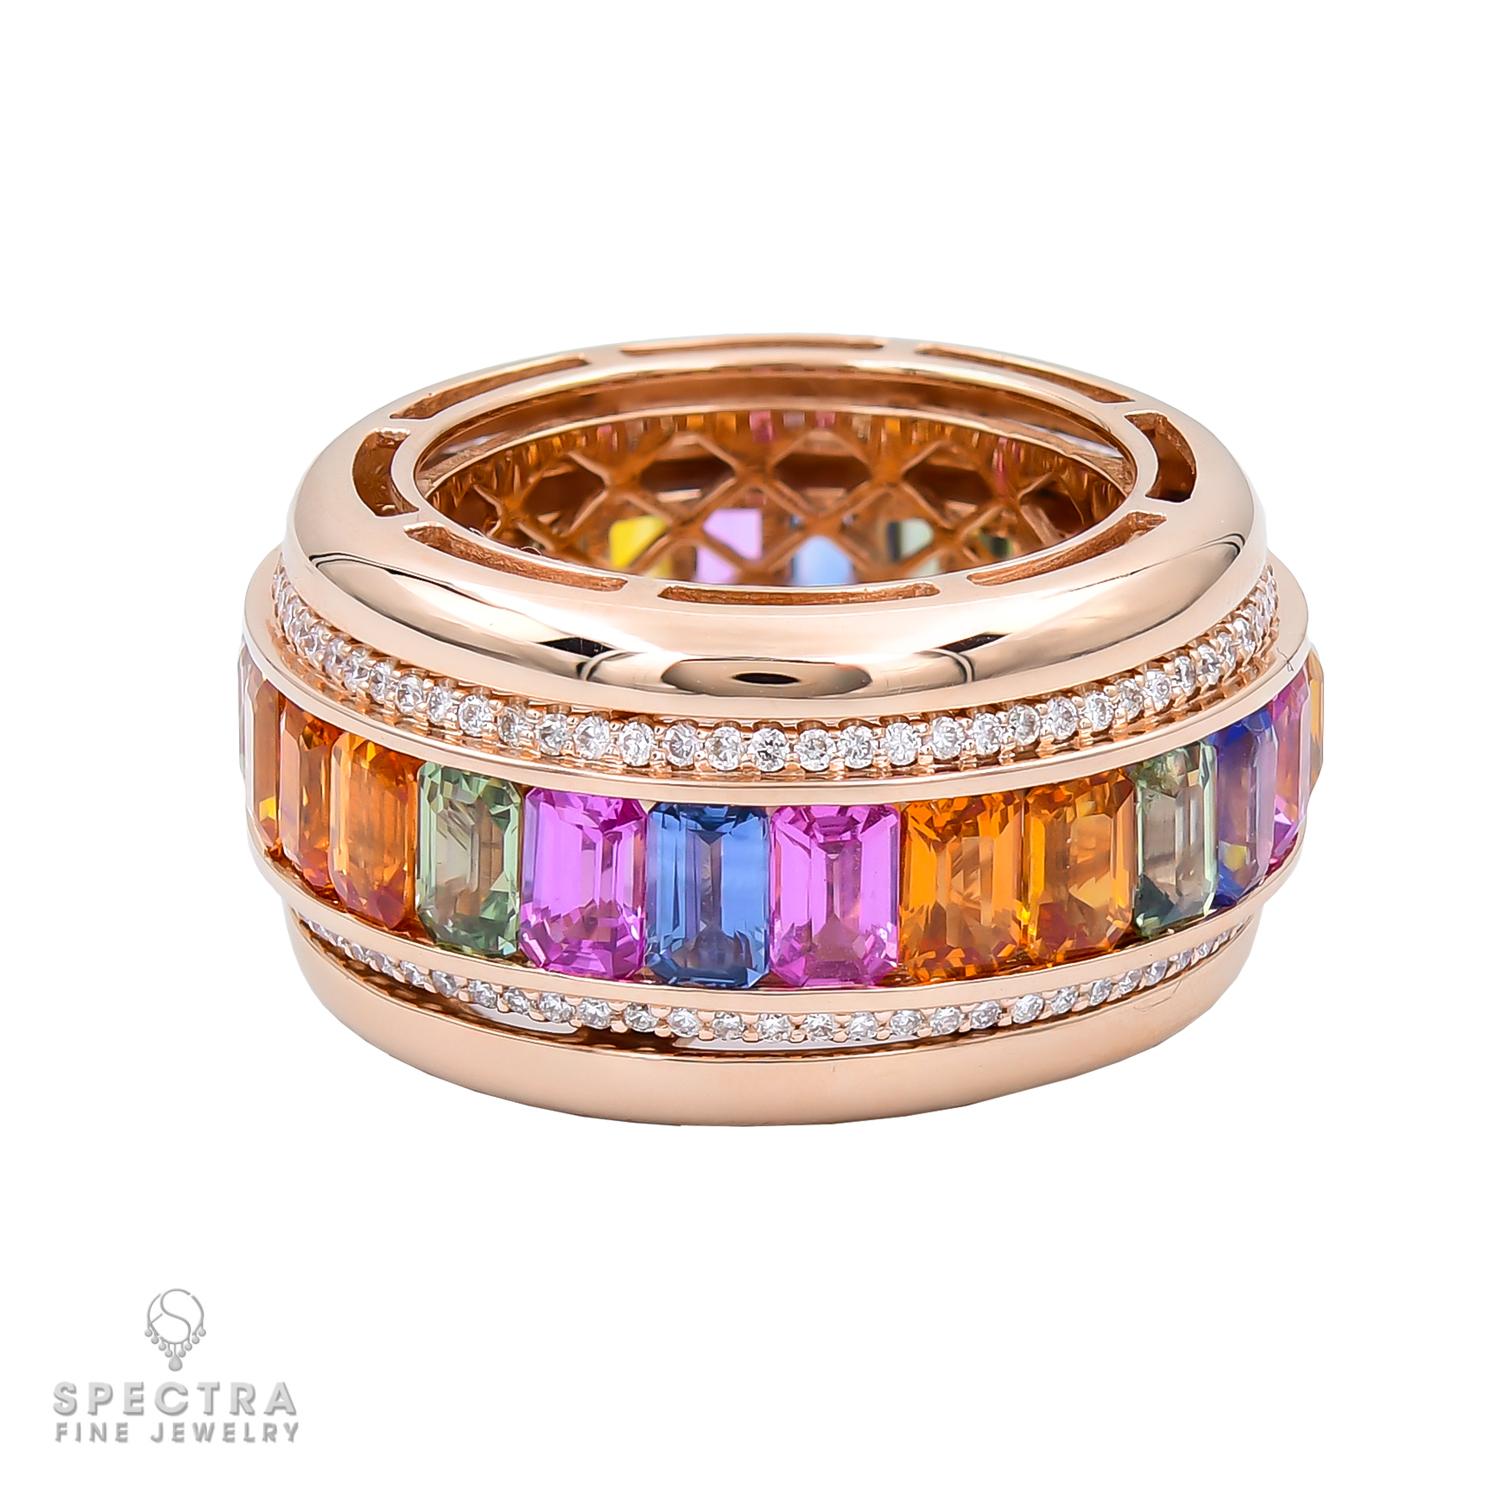 A wide band ring featuring a spinning center set with 26 emerald-cut multicolored sapphires, weighing a total of 8.9 carats.
21 multicolored sapphires weighing a total of 7.16 carats.
5 pink sapphires weighing a total of 1.74 carats.
Each stone is